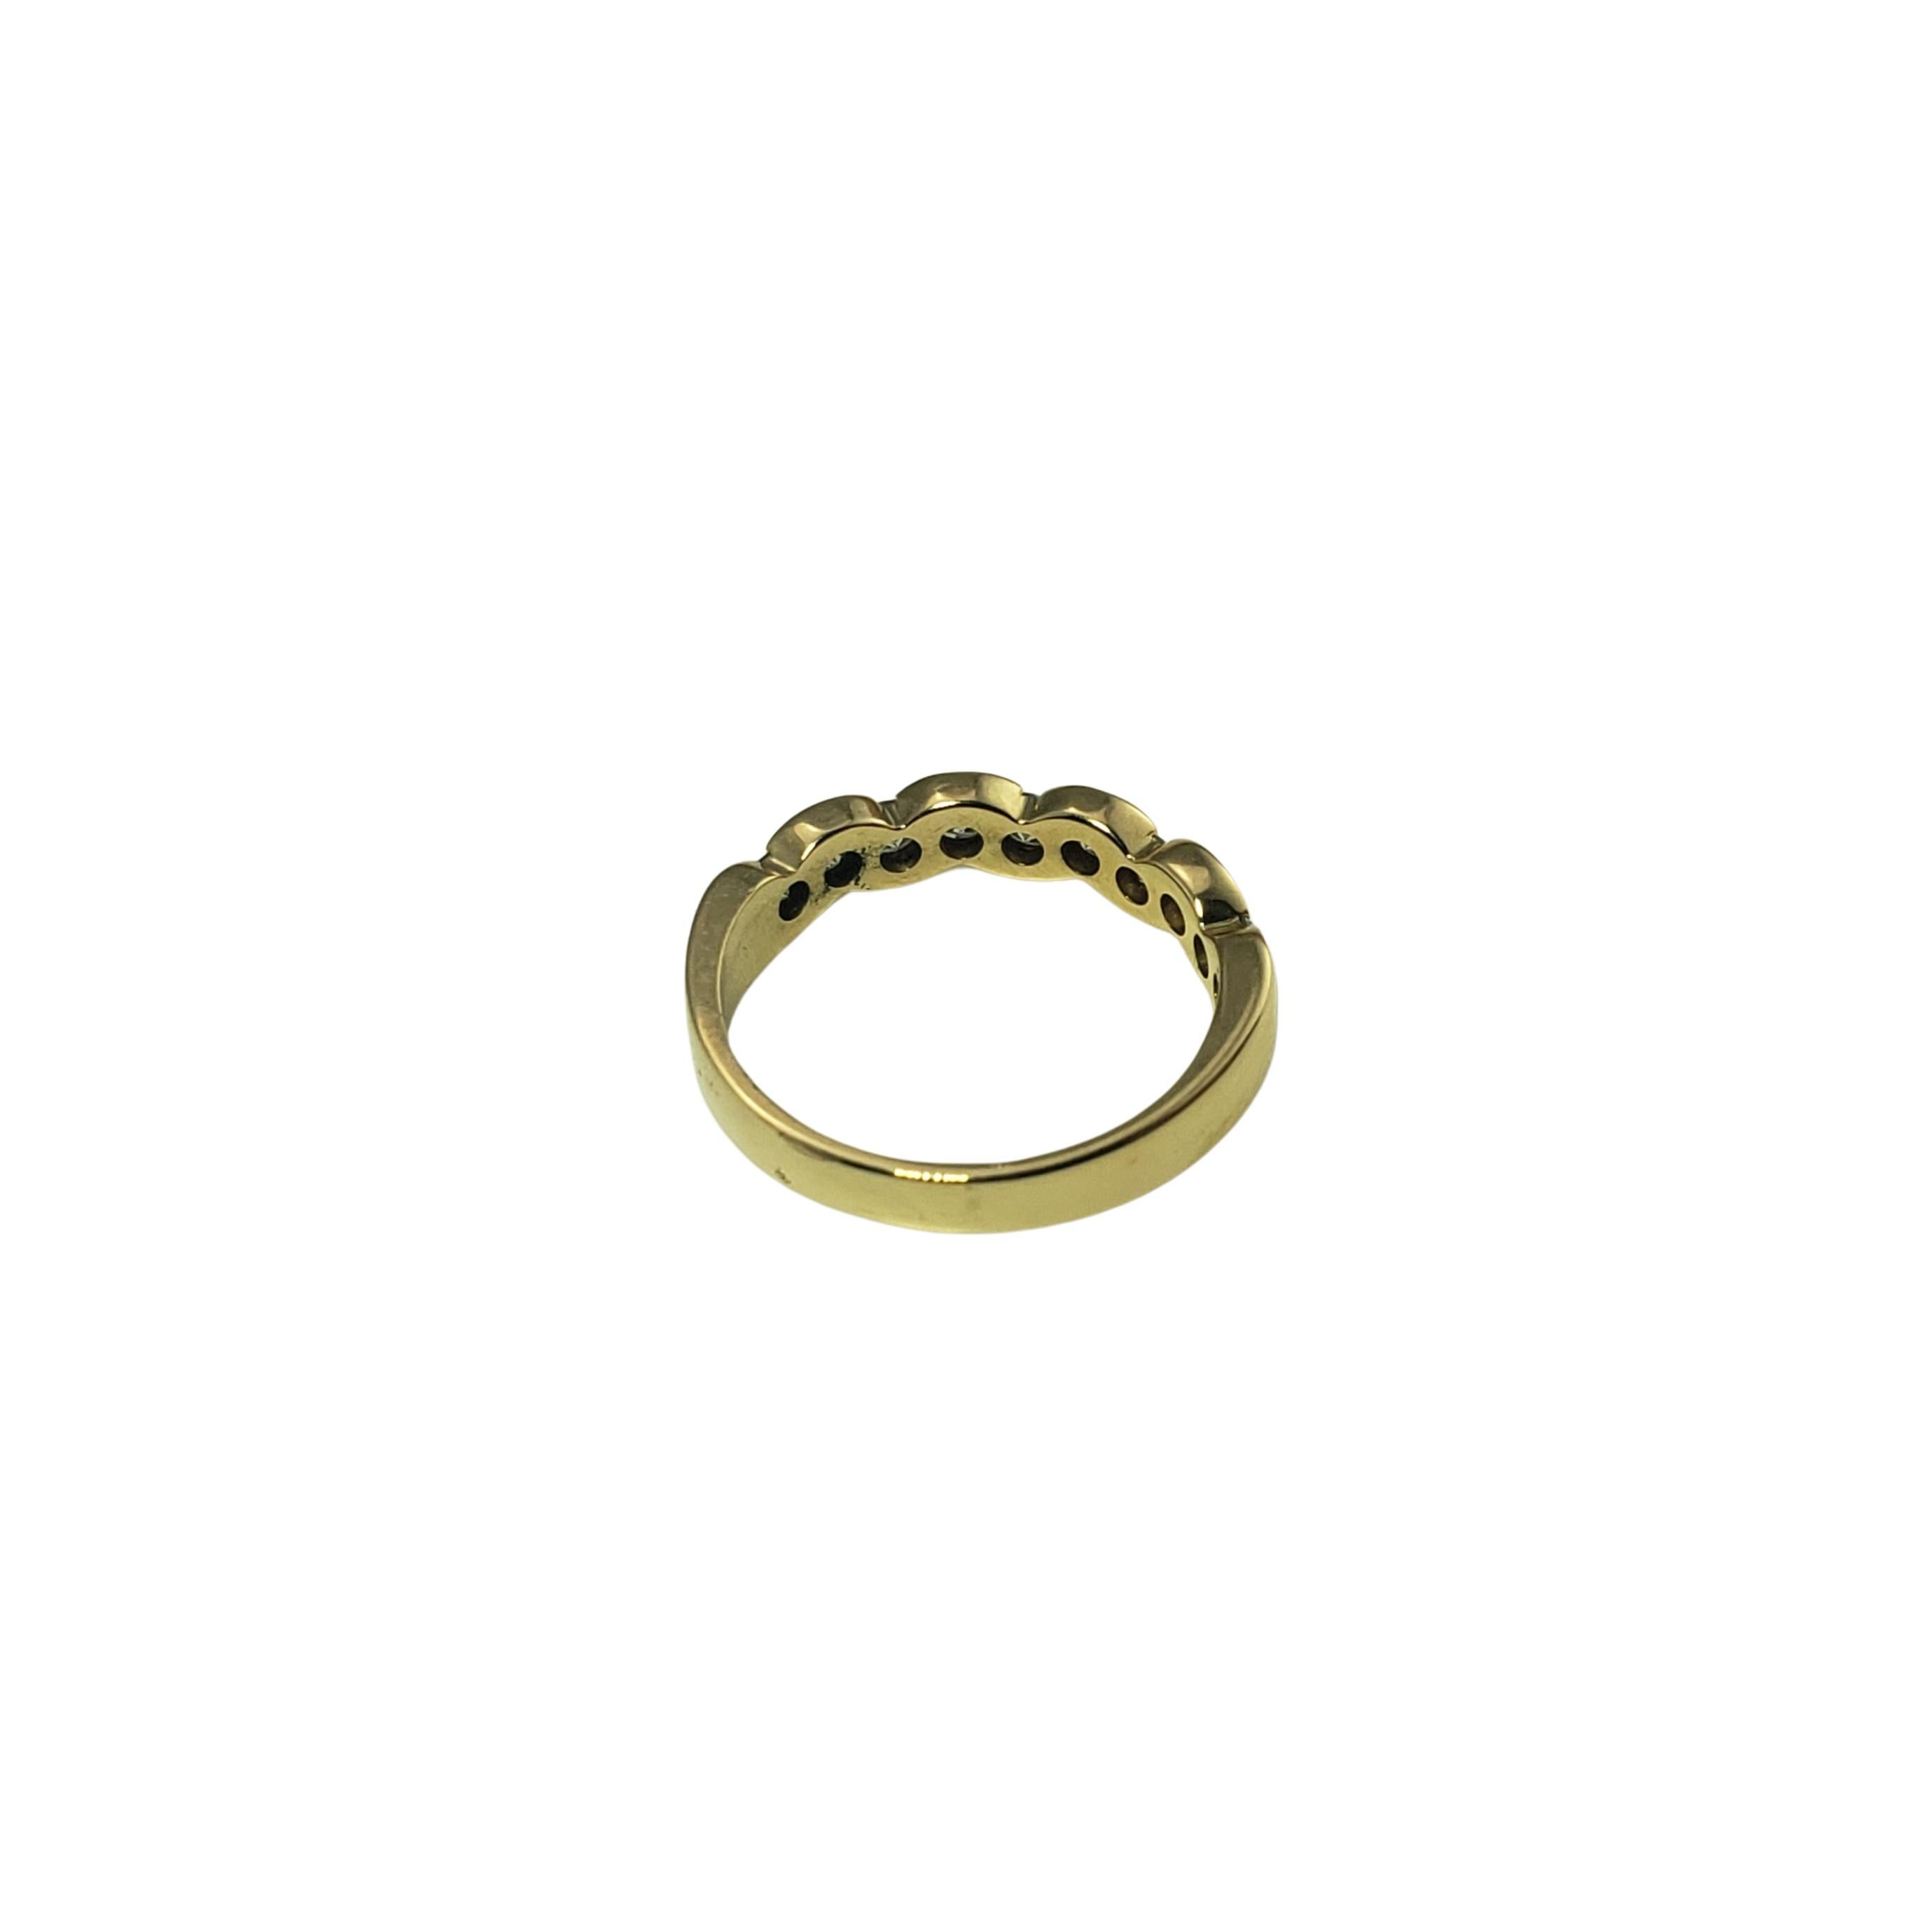 Vintage 18 Karat Yellow Gold and Diamond Ring Size 5.25-

This elegant band features ten round brilliant cut diamonds set in beautifully detailed 18K yellow gold.
Width: 4 mm. Shank: 2 mm.

Approximate total diamond weight: .40 ct.

Diamond clarity: